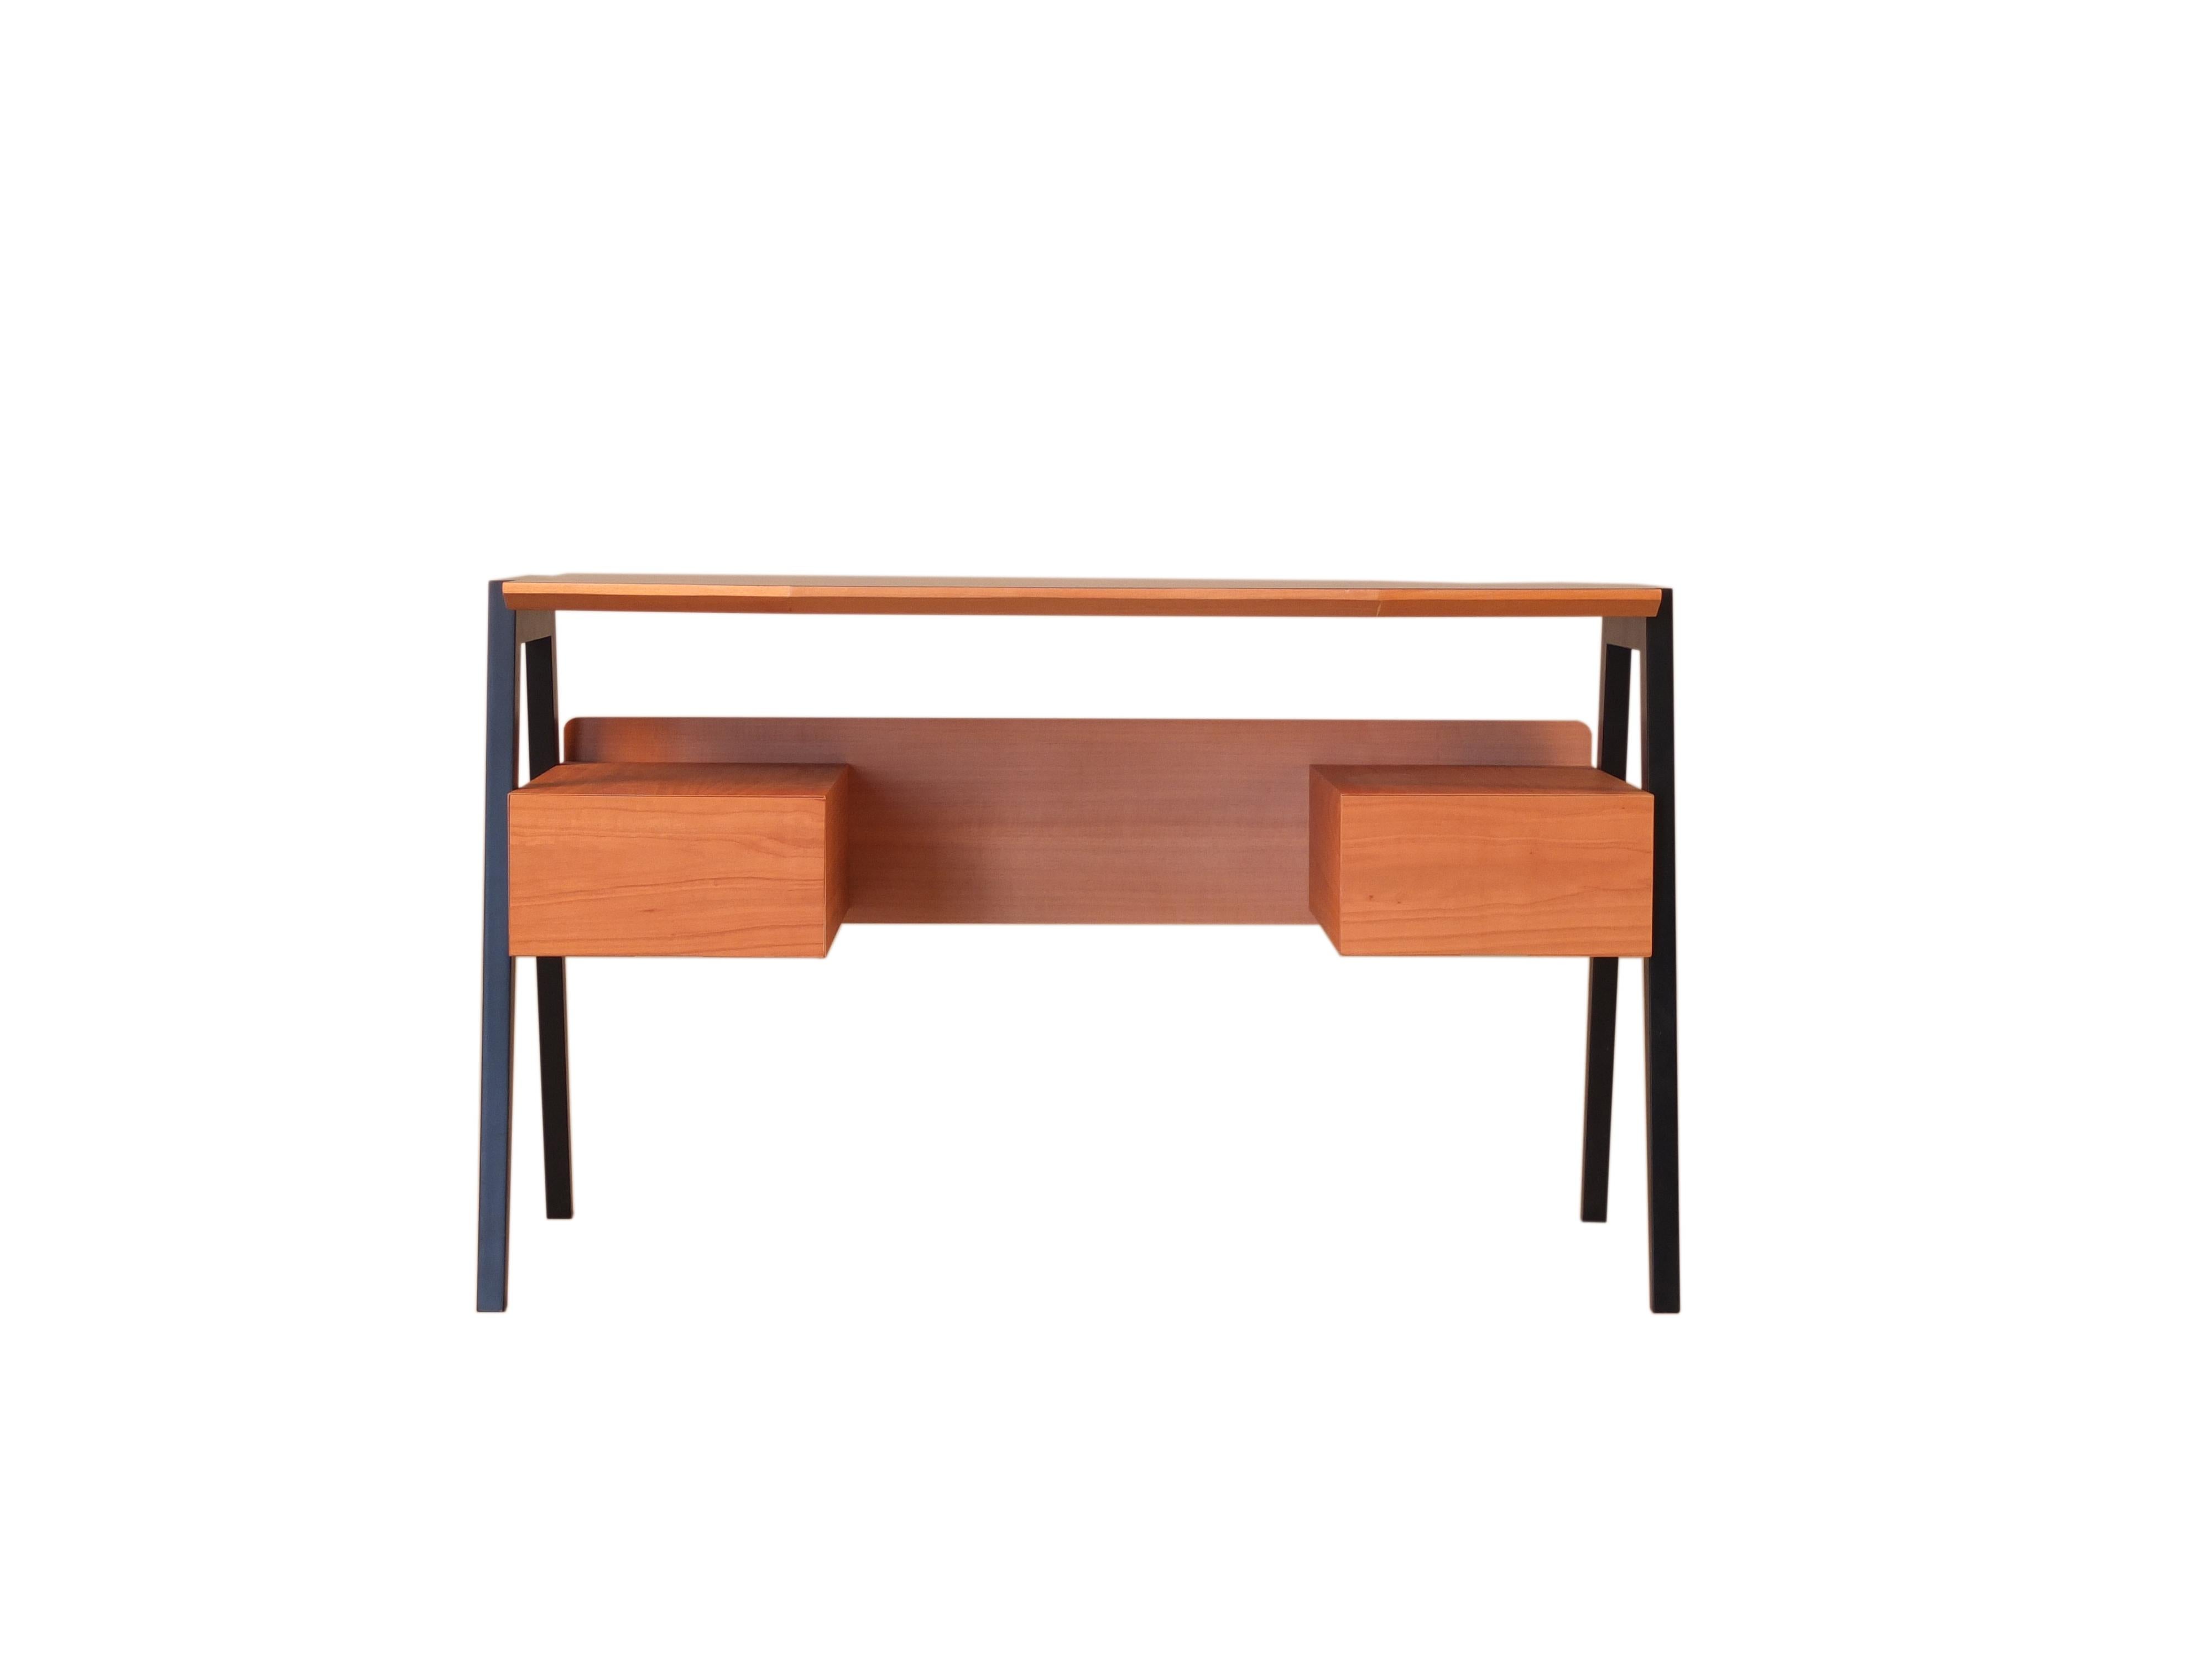 Italian Midcentury Style Wooden Writing Desk with Drawers, by Morelato